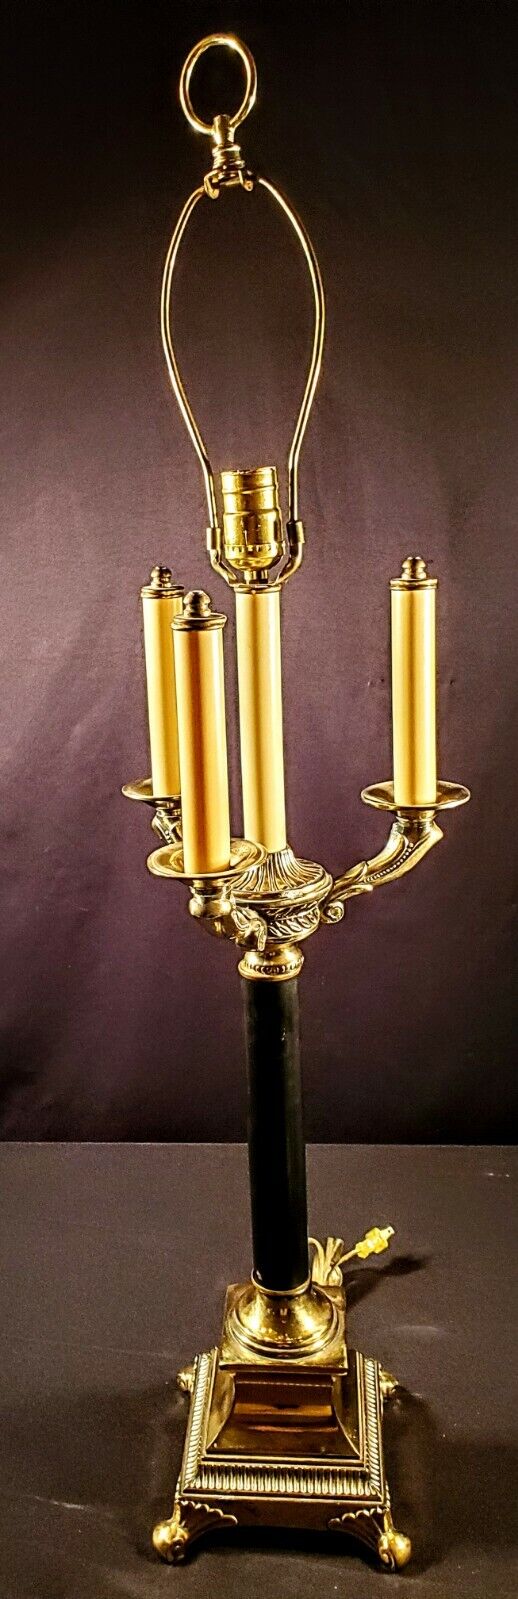 Baccarat-style 37 Inch Hollywood Regency Electric Scrolled Brass Candelaria Lamp